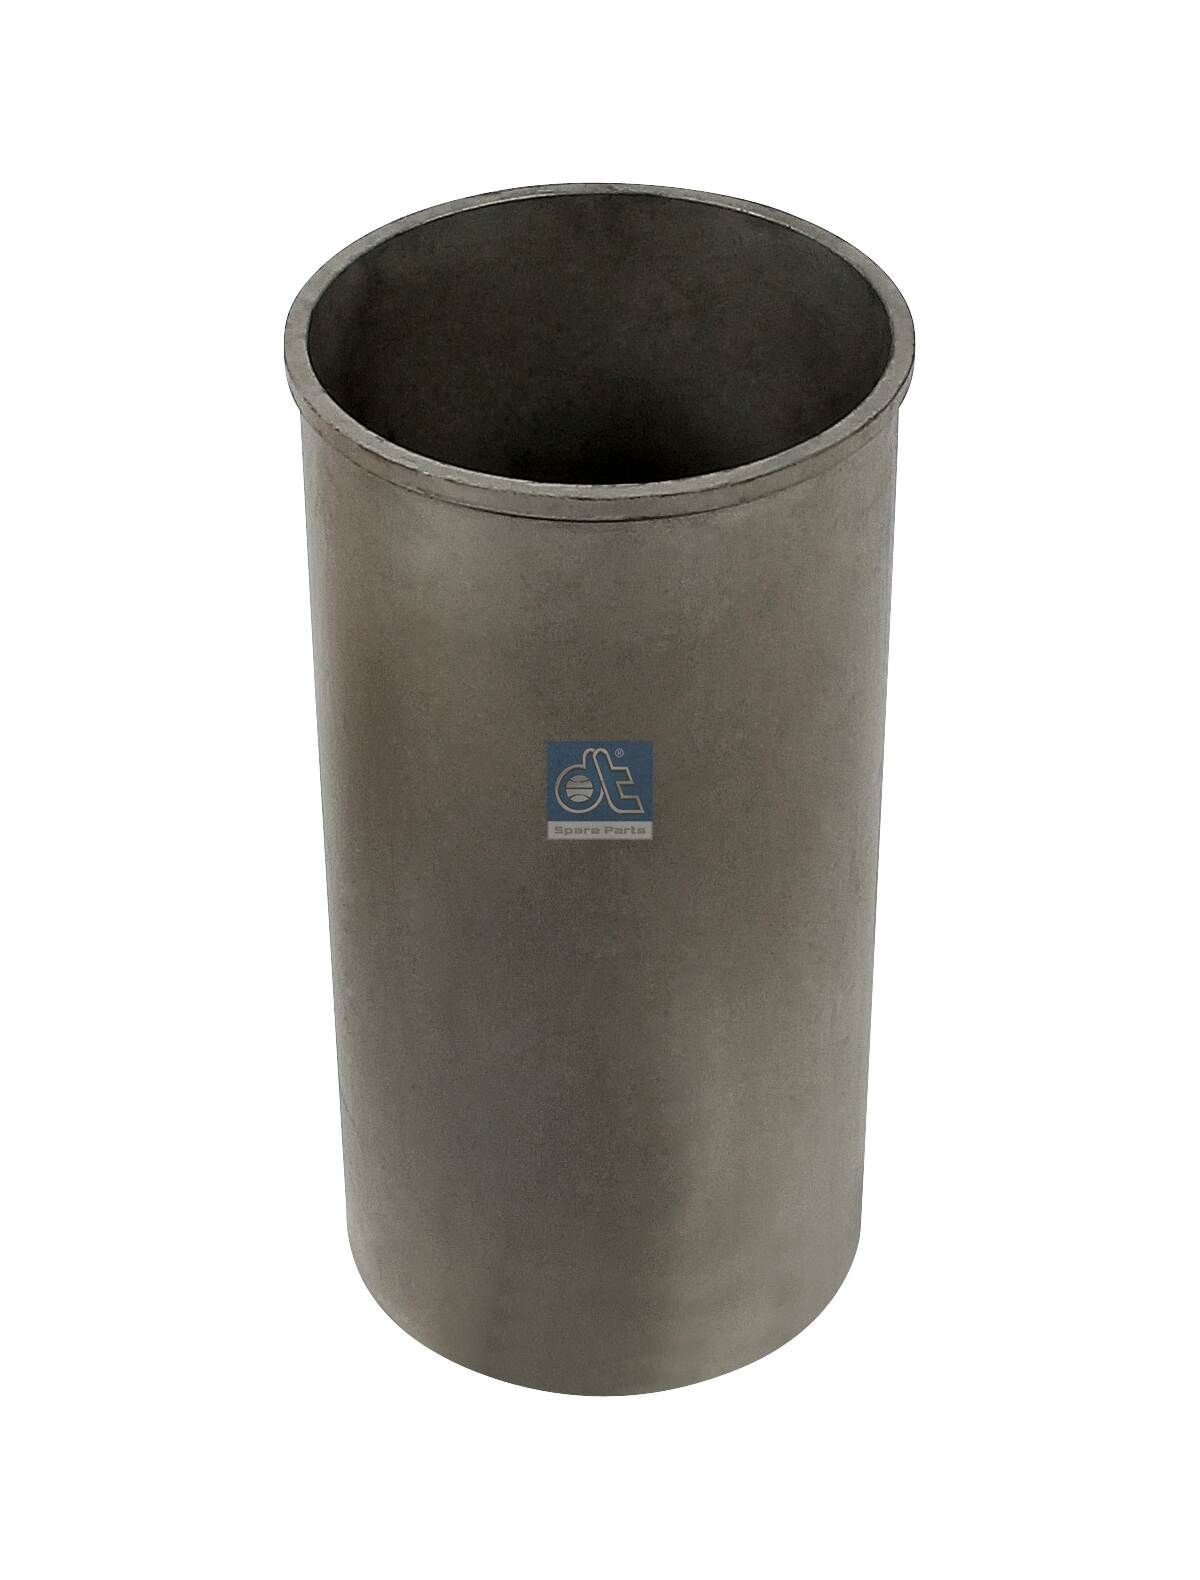 008 WT 02 DT Spare Parts Cylinder Sleeve 7.54623 buy